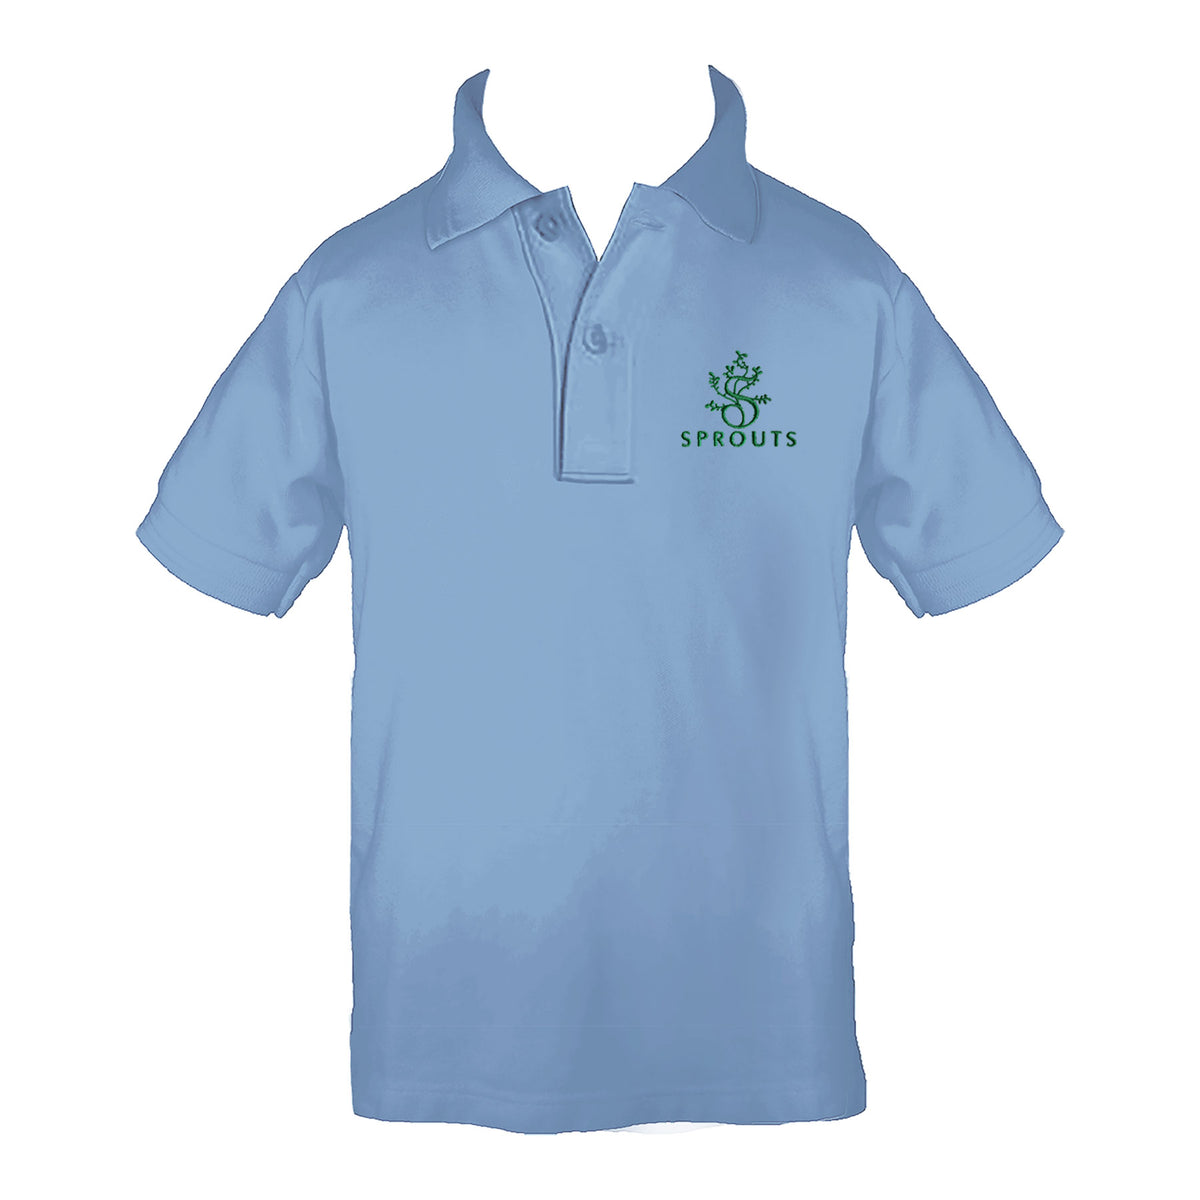 SPROUTS ACADEMY GOLF SHIRT, UNISEX, SHORT SLEEVE, YOUTH